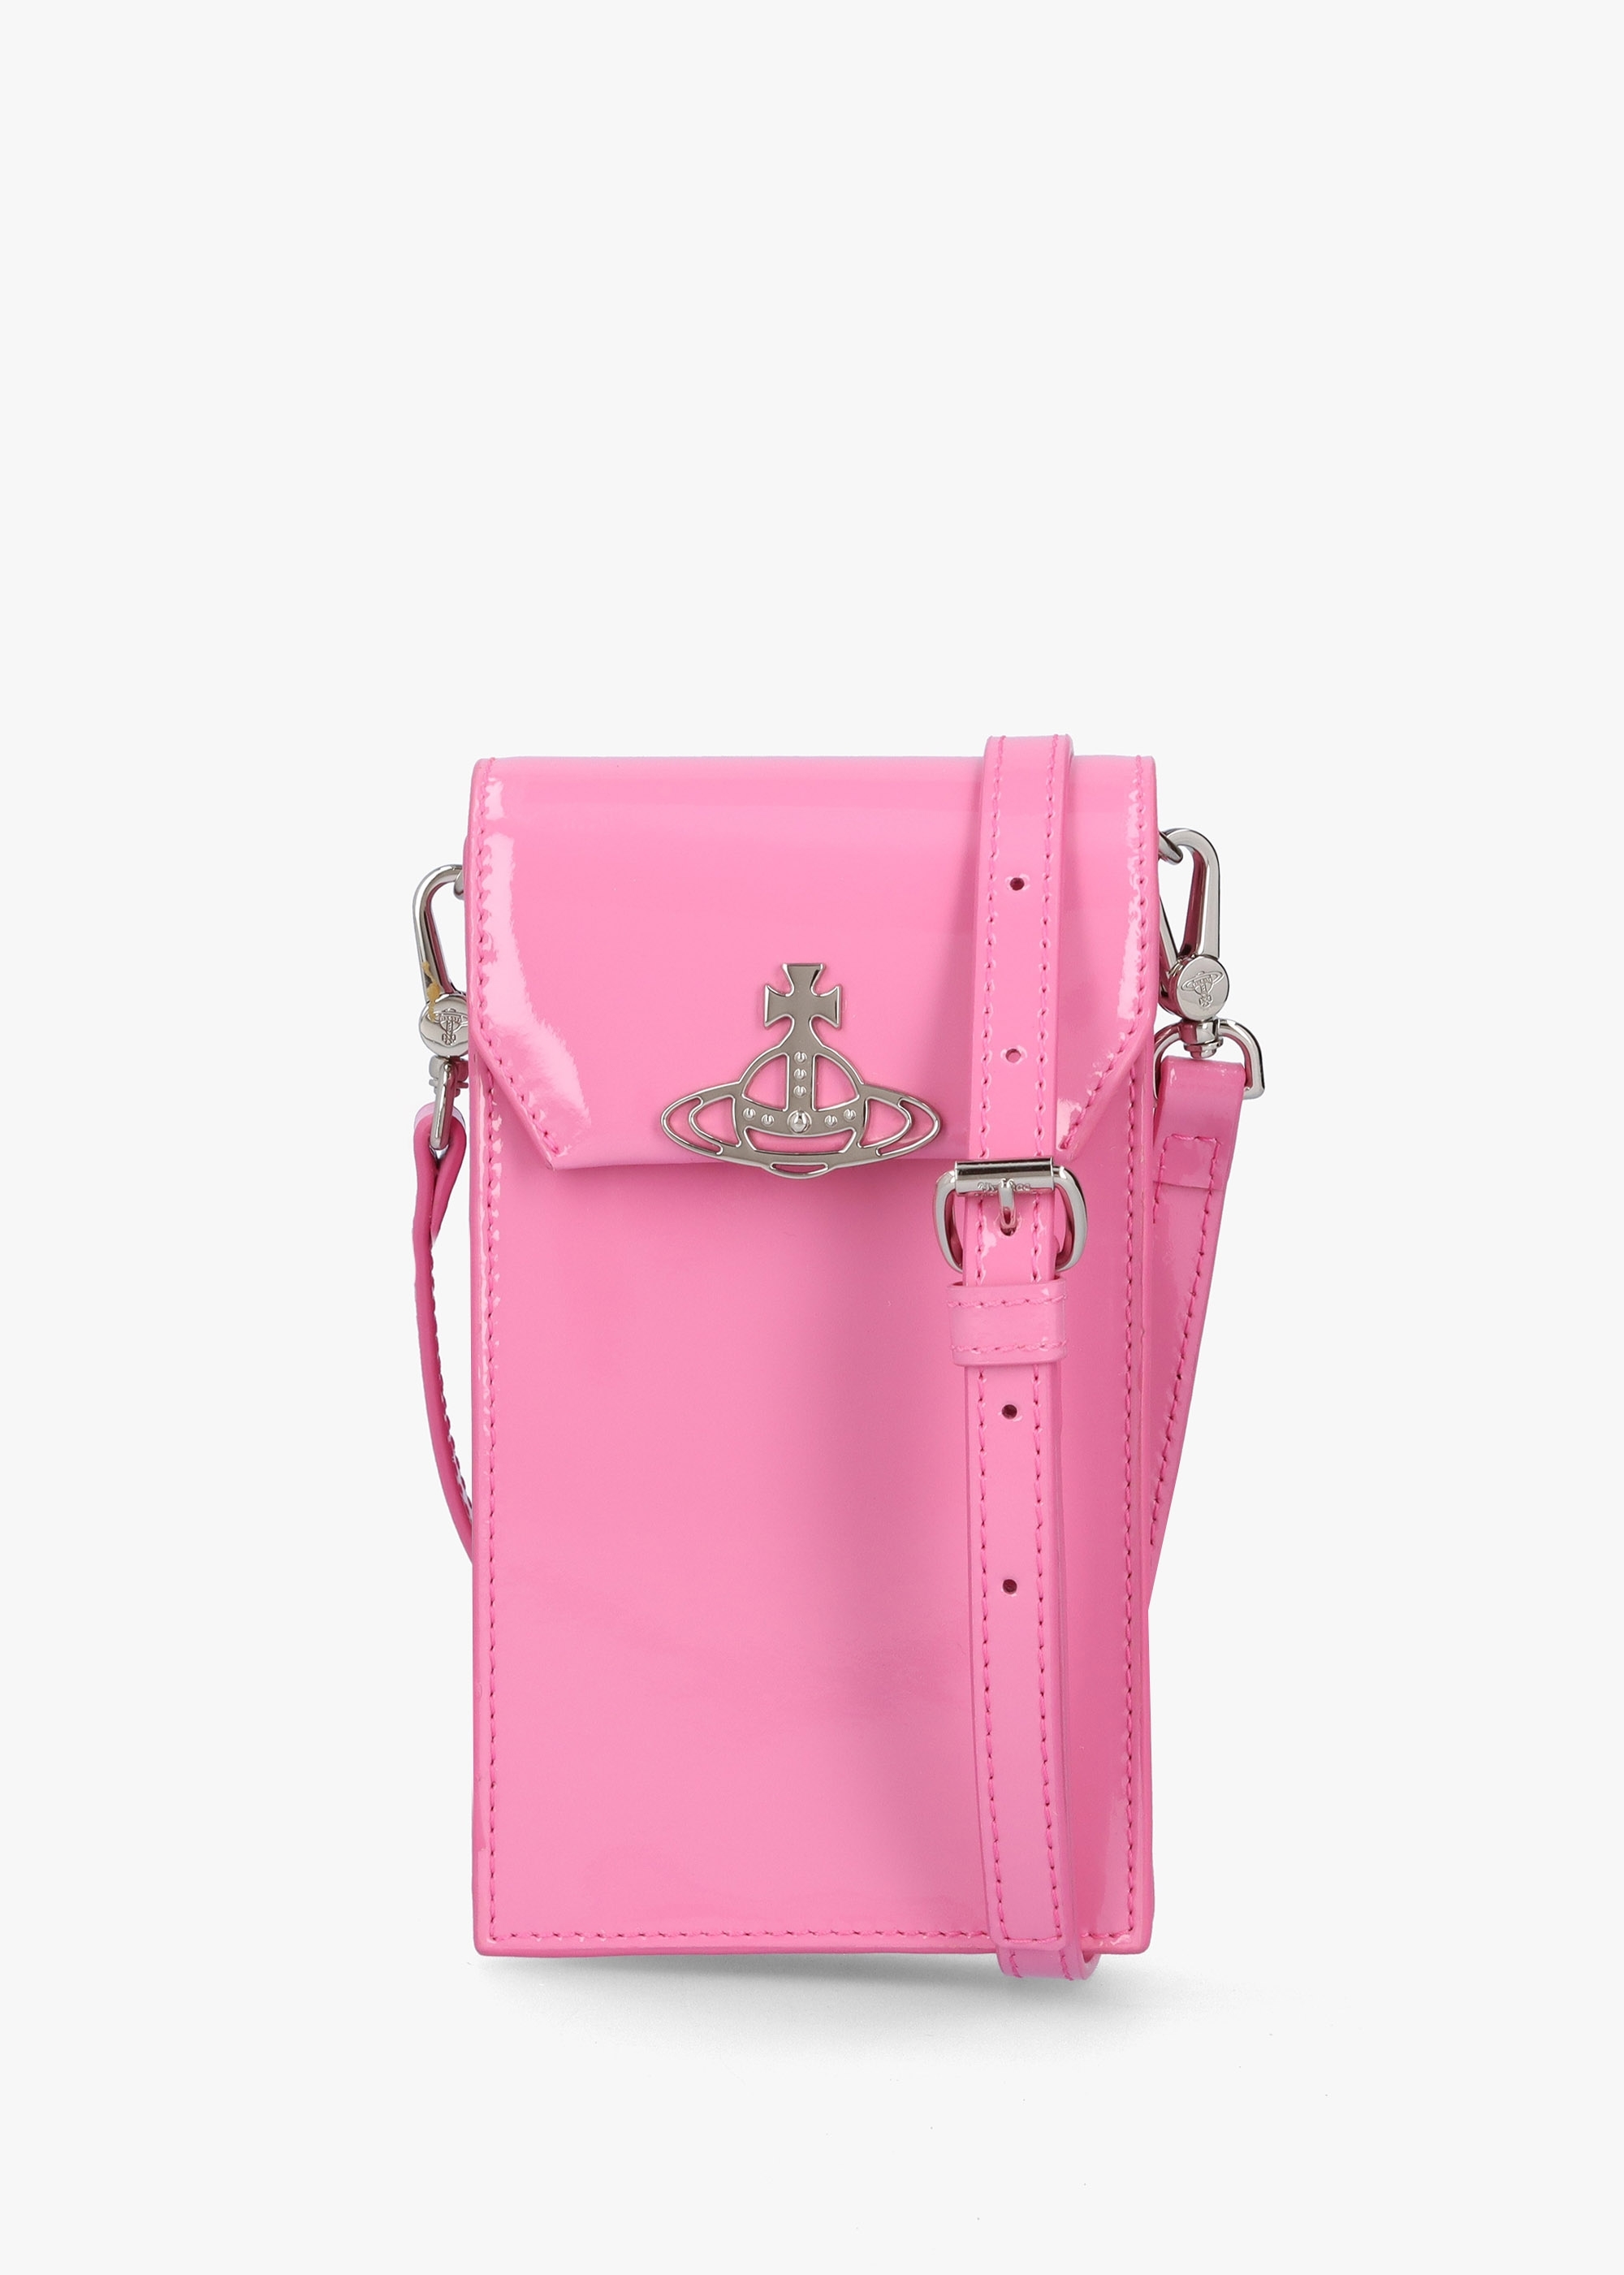 Vivienne Westwood  Womens Leather Phone Bag In Pink Patent